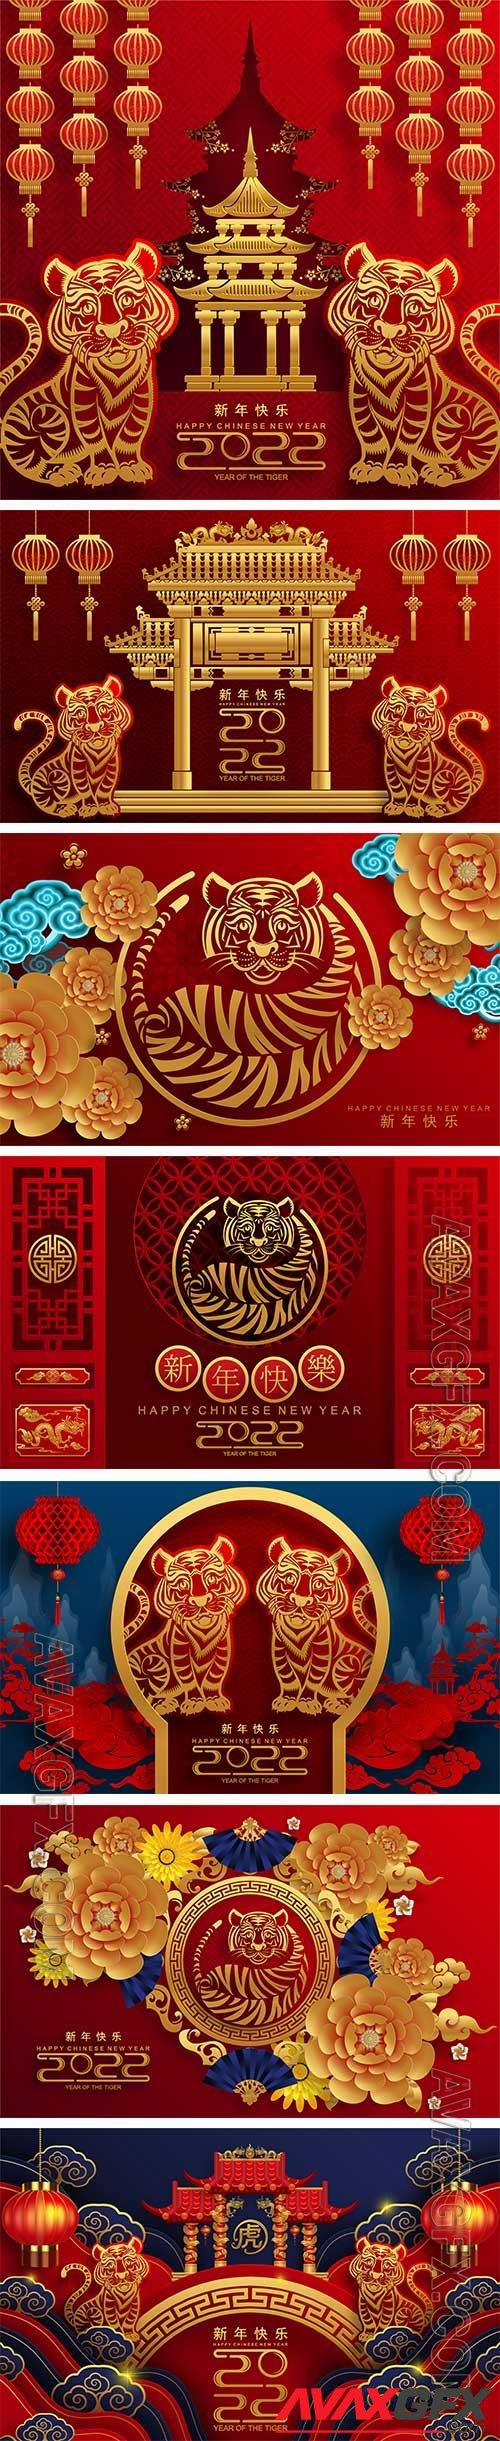 Chinese New Year vector illustration with tigers and flowers